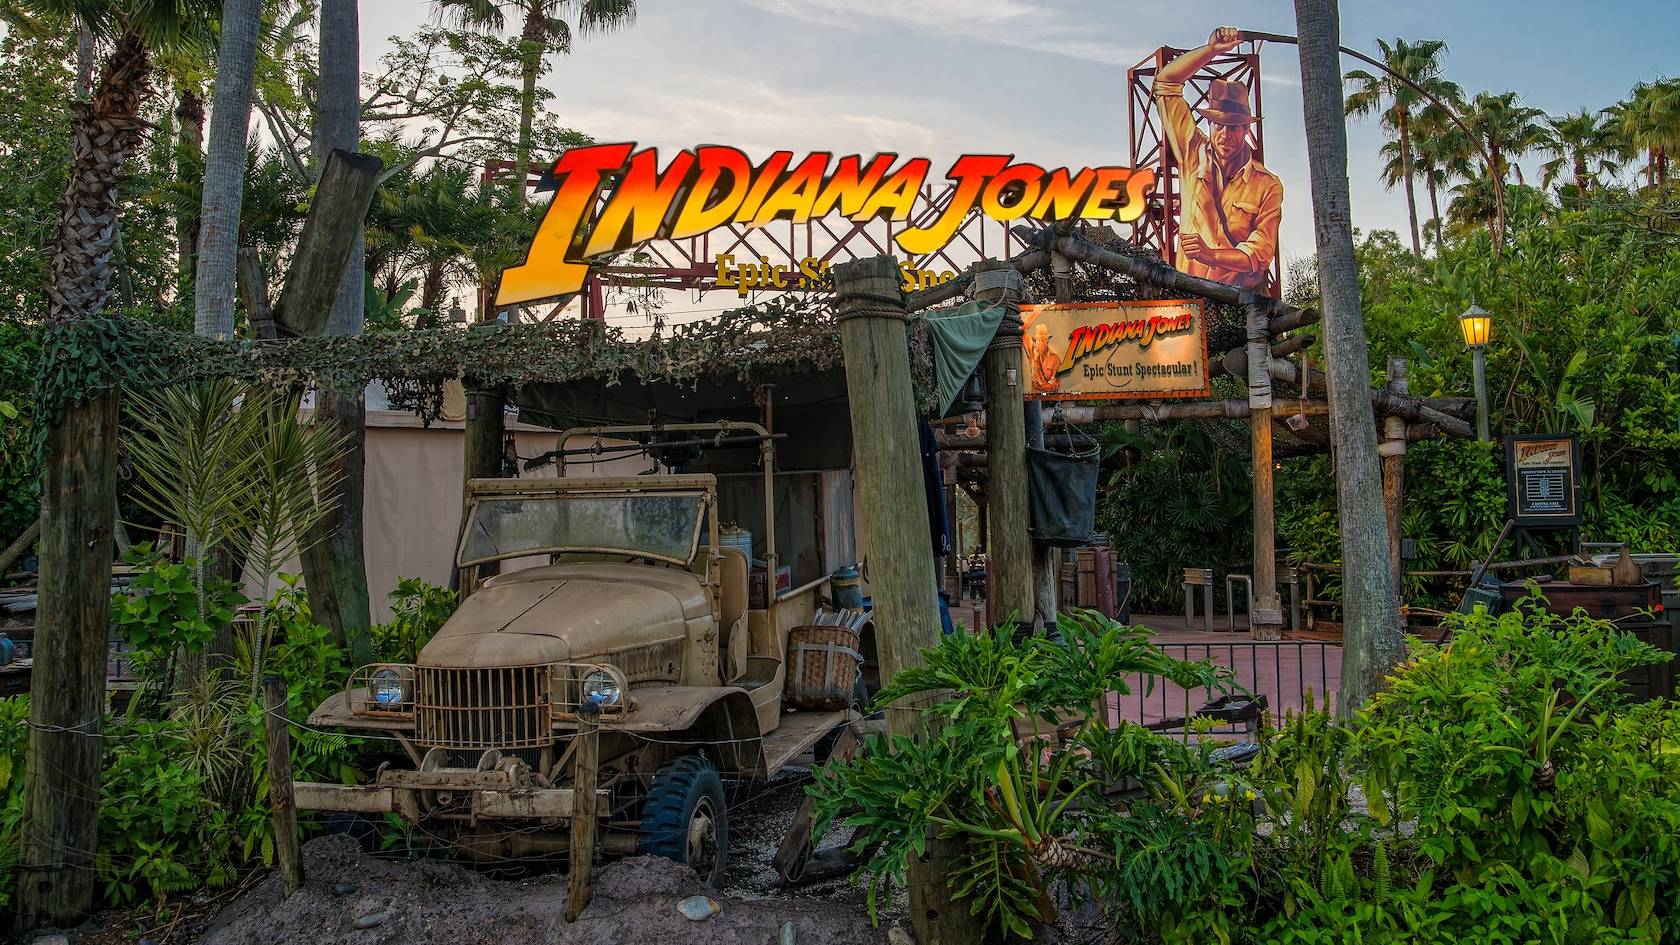 Indiana Jones Epic Stunt Spectacular! closed for refurbishment for a few days in January 2010